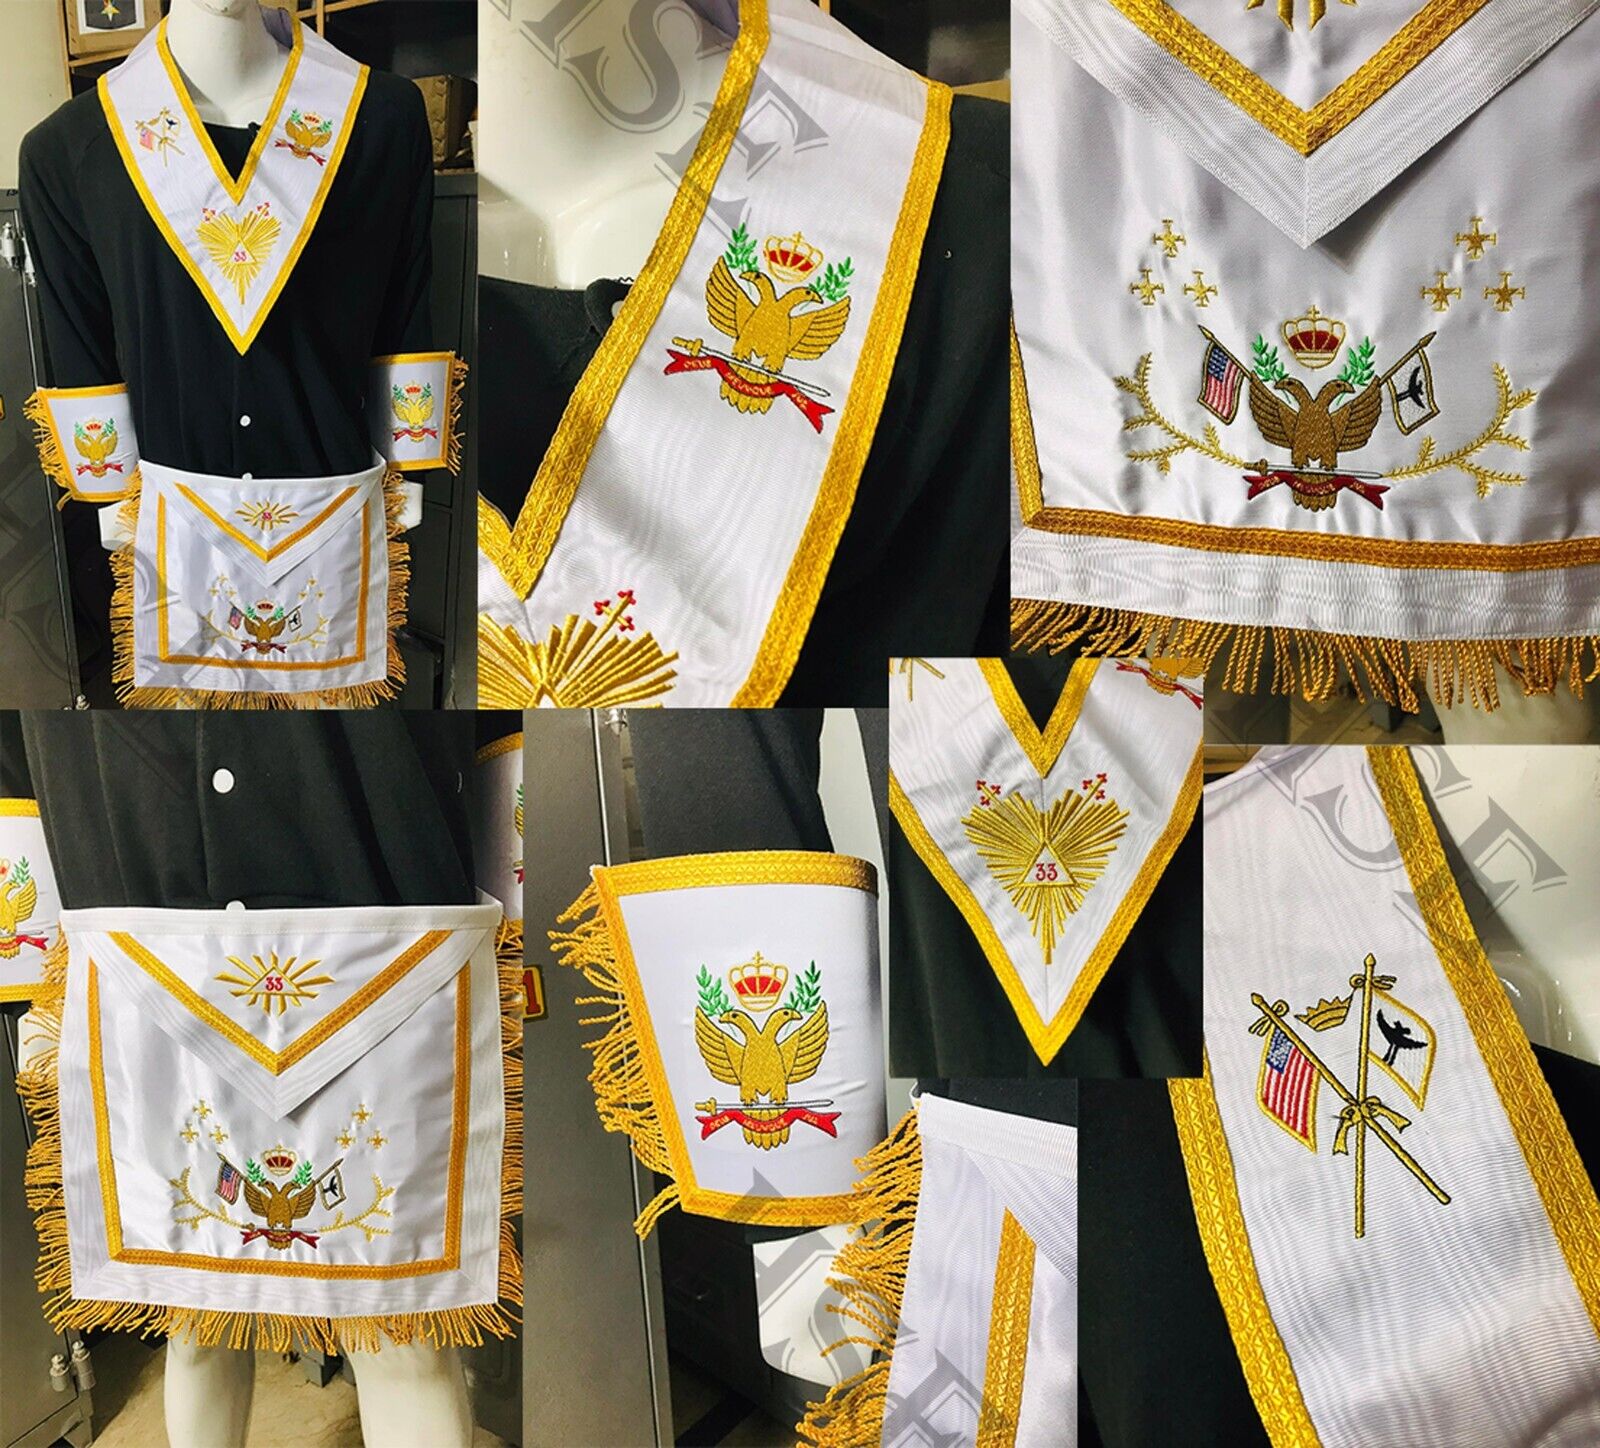 New Scottish Rite 33rd Degree Apron With Cuffs & Collar Gold Embroidery Upwings